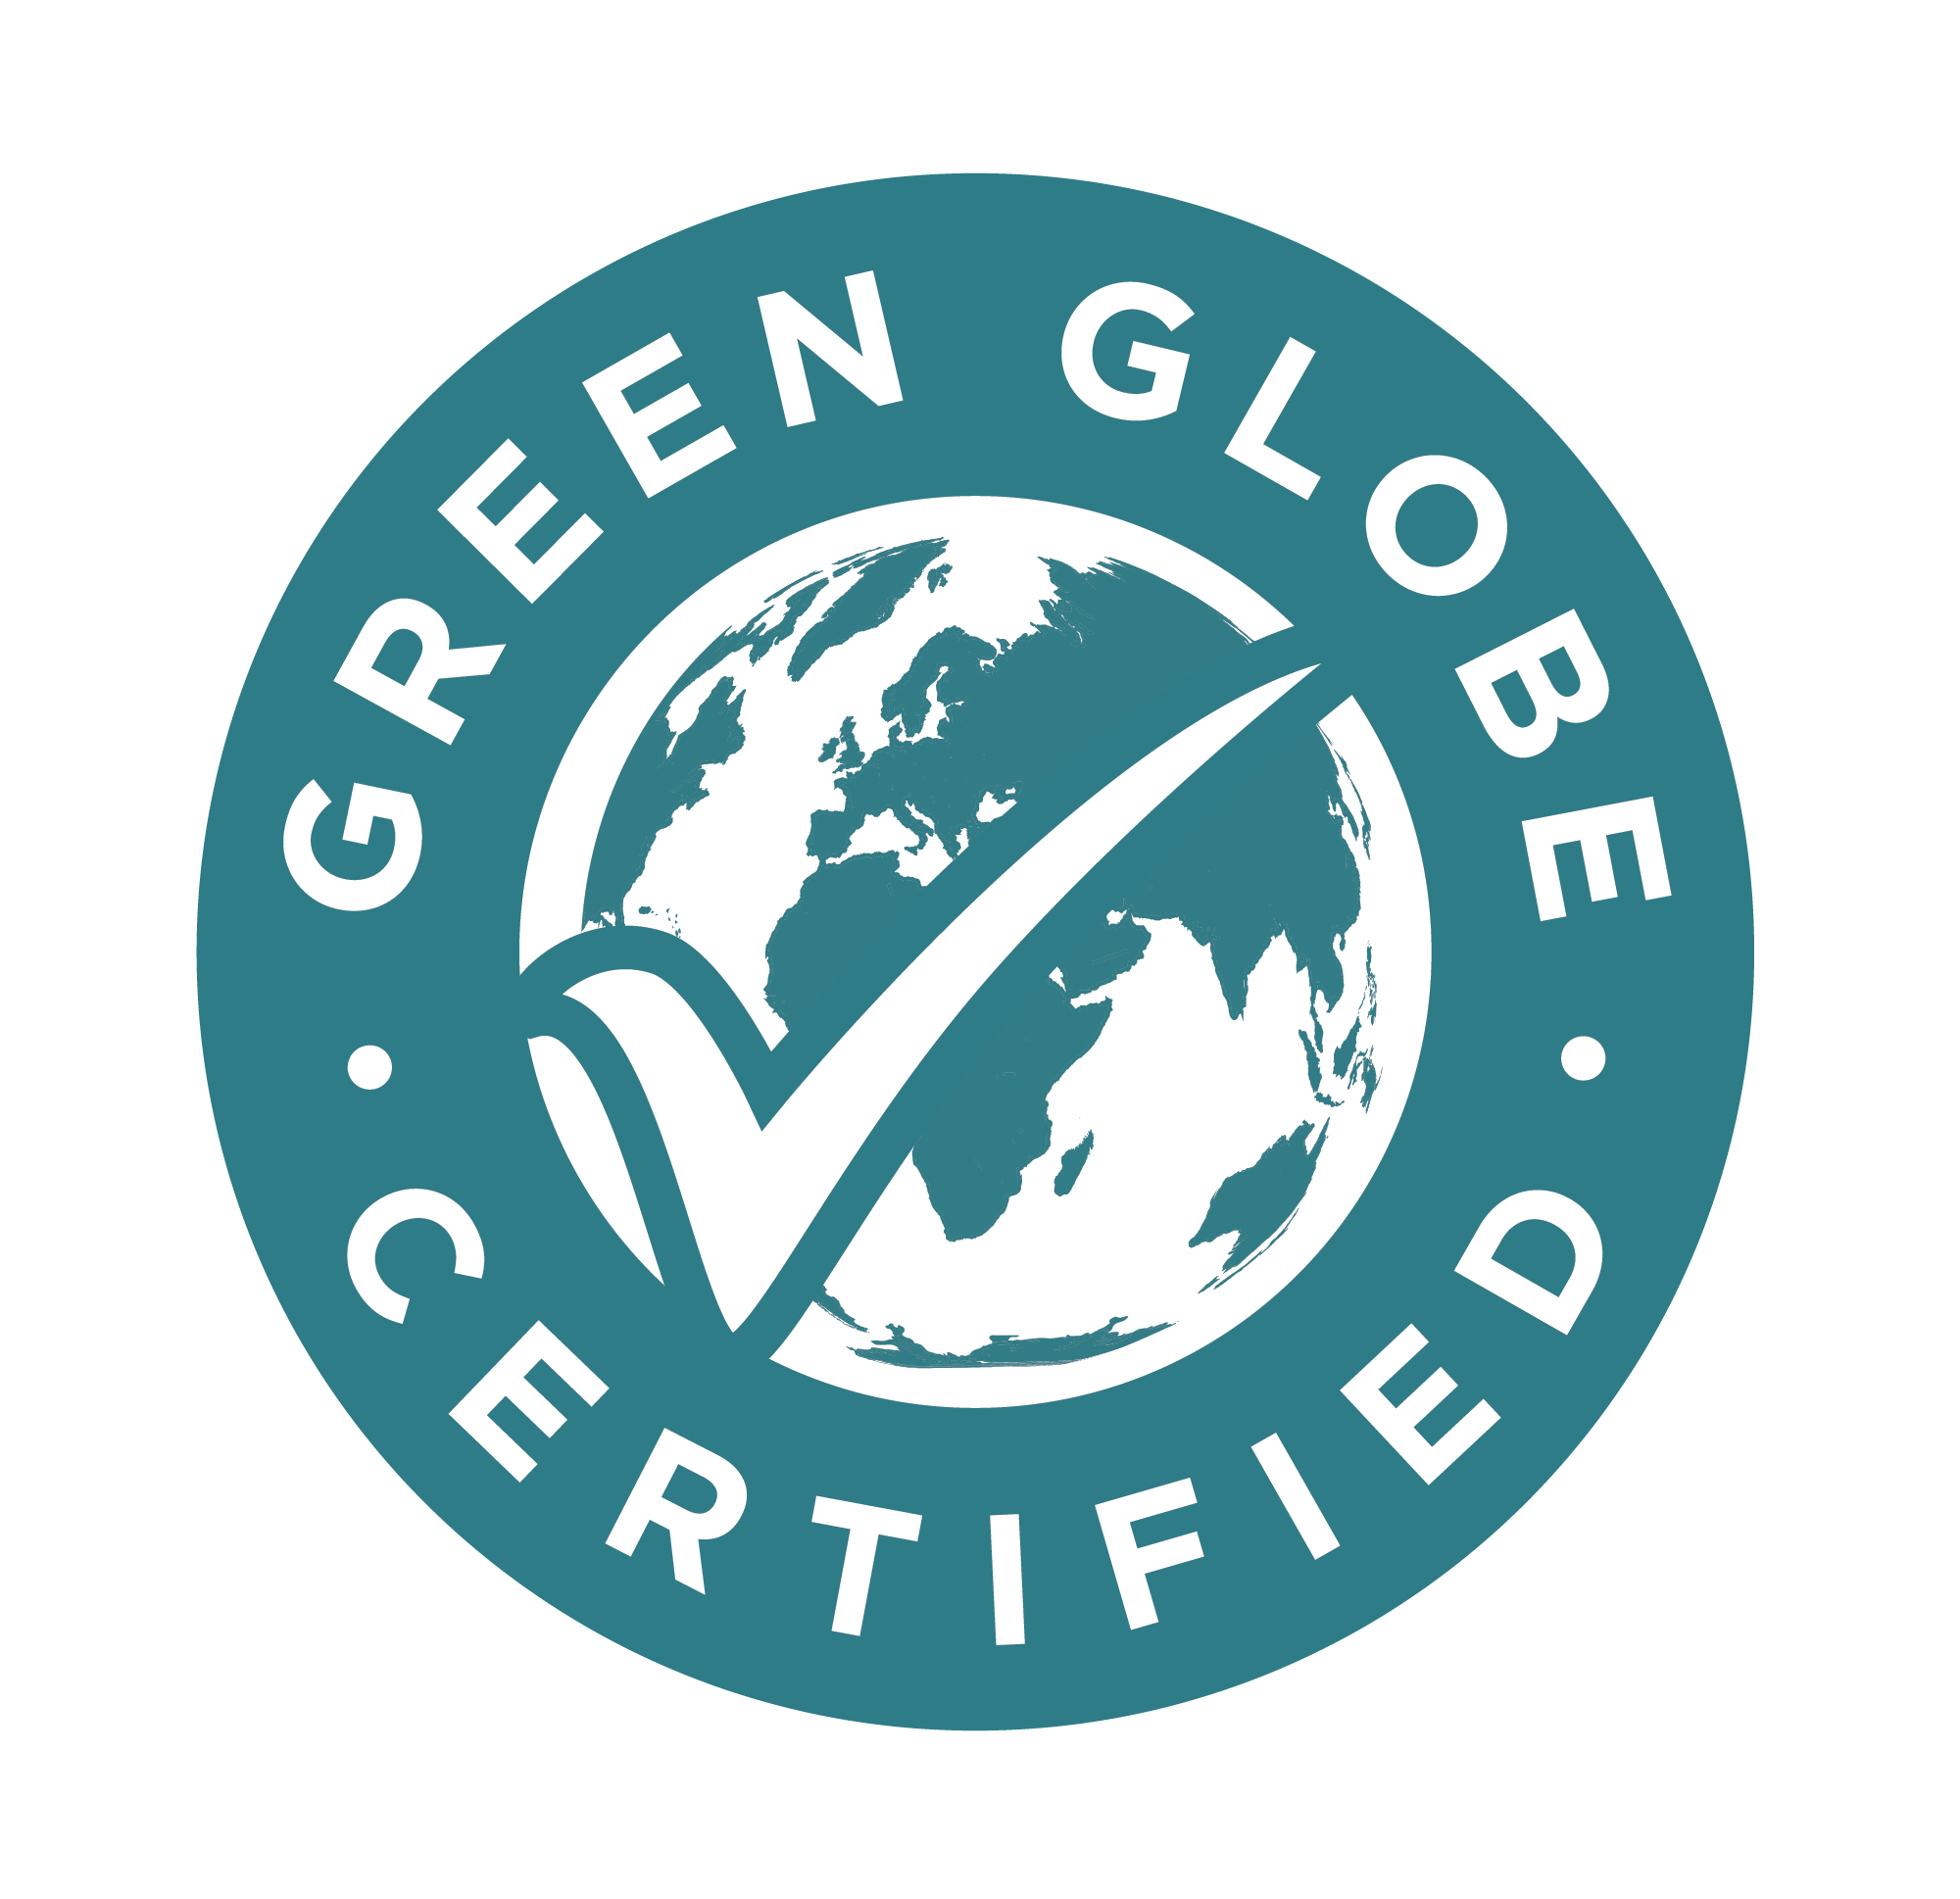 Australia's only Green Globe certified convention centre